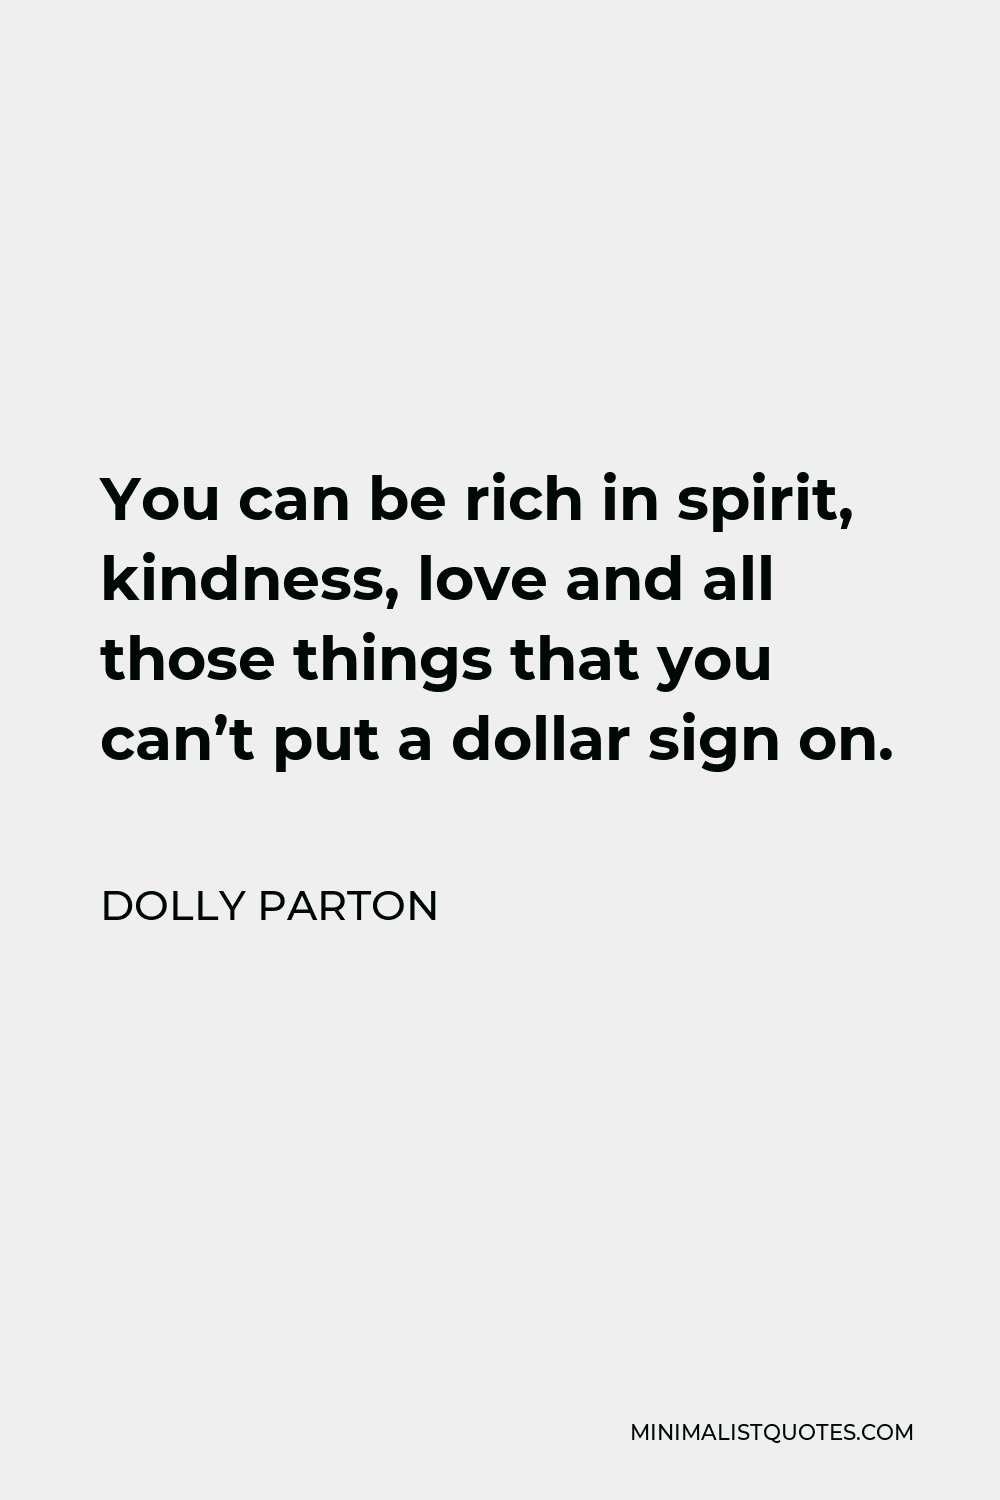 Dolly Parton Quote - You can be rich in spirit, kindness, love and all those things that you can’t put a dollar sign on.